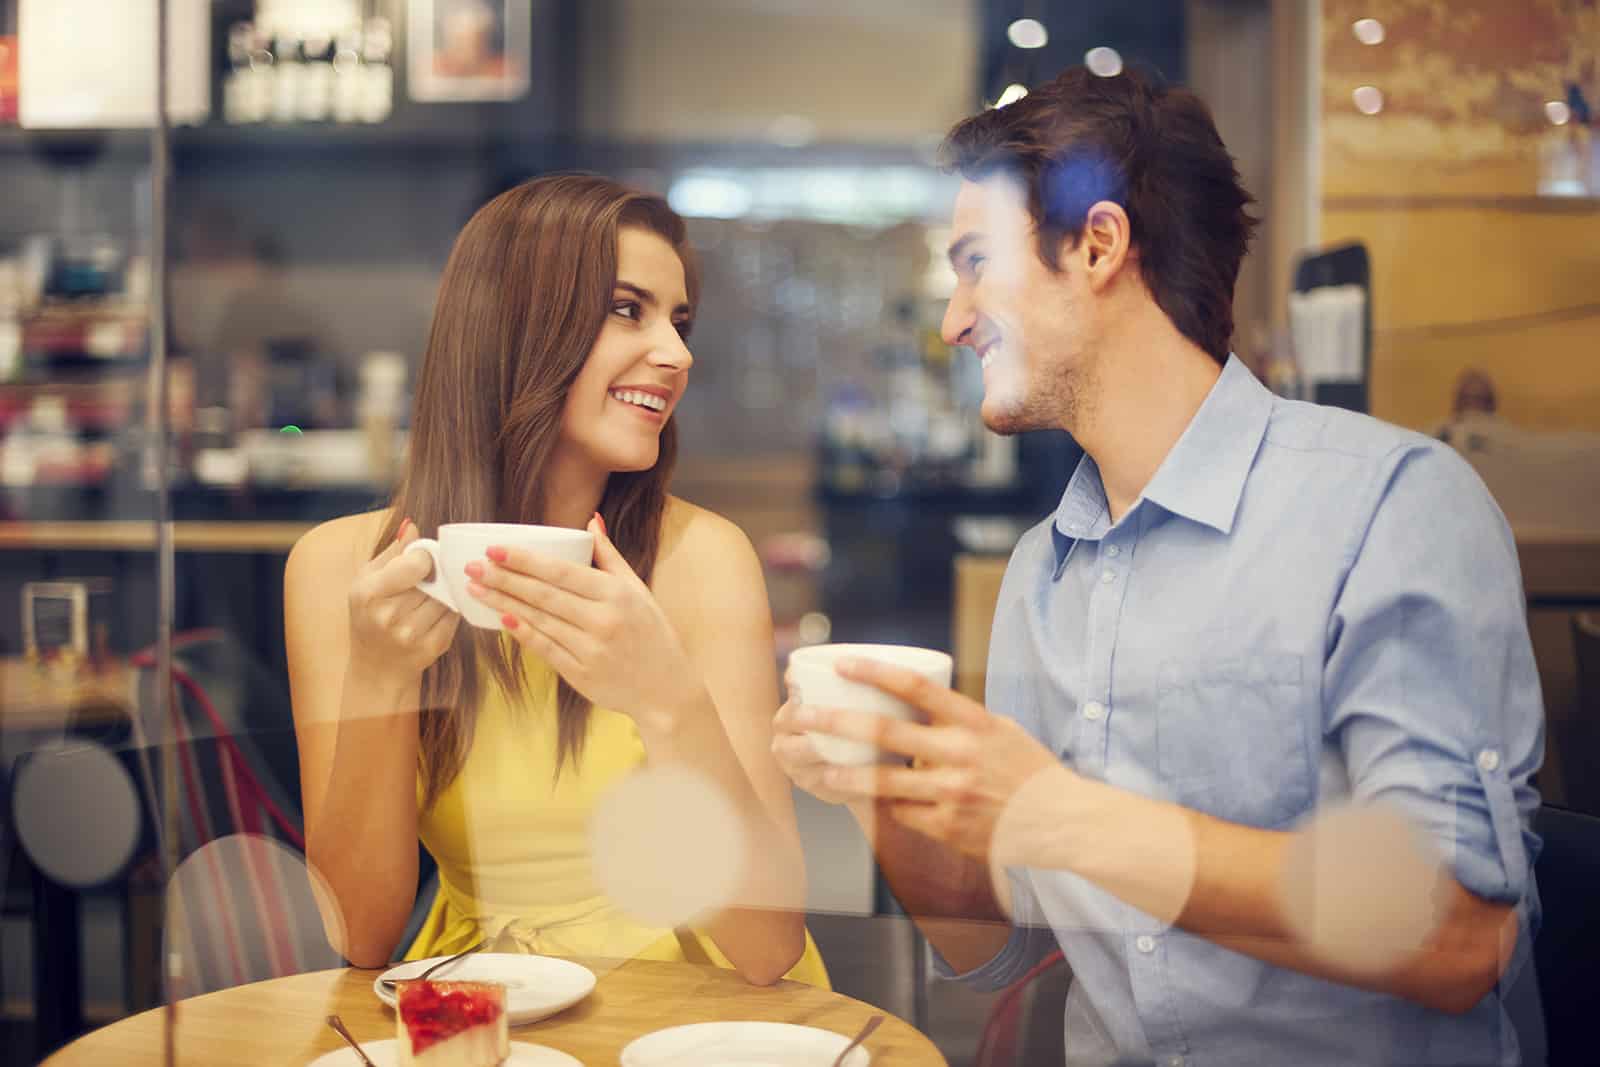 a smiling man and woman talking in a cafe